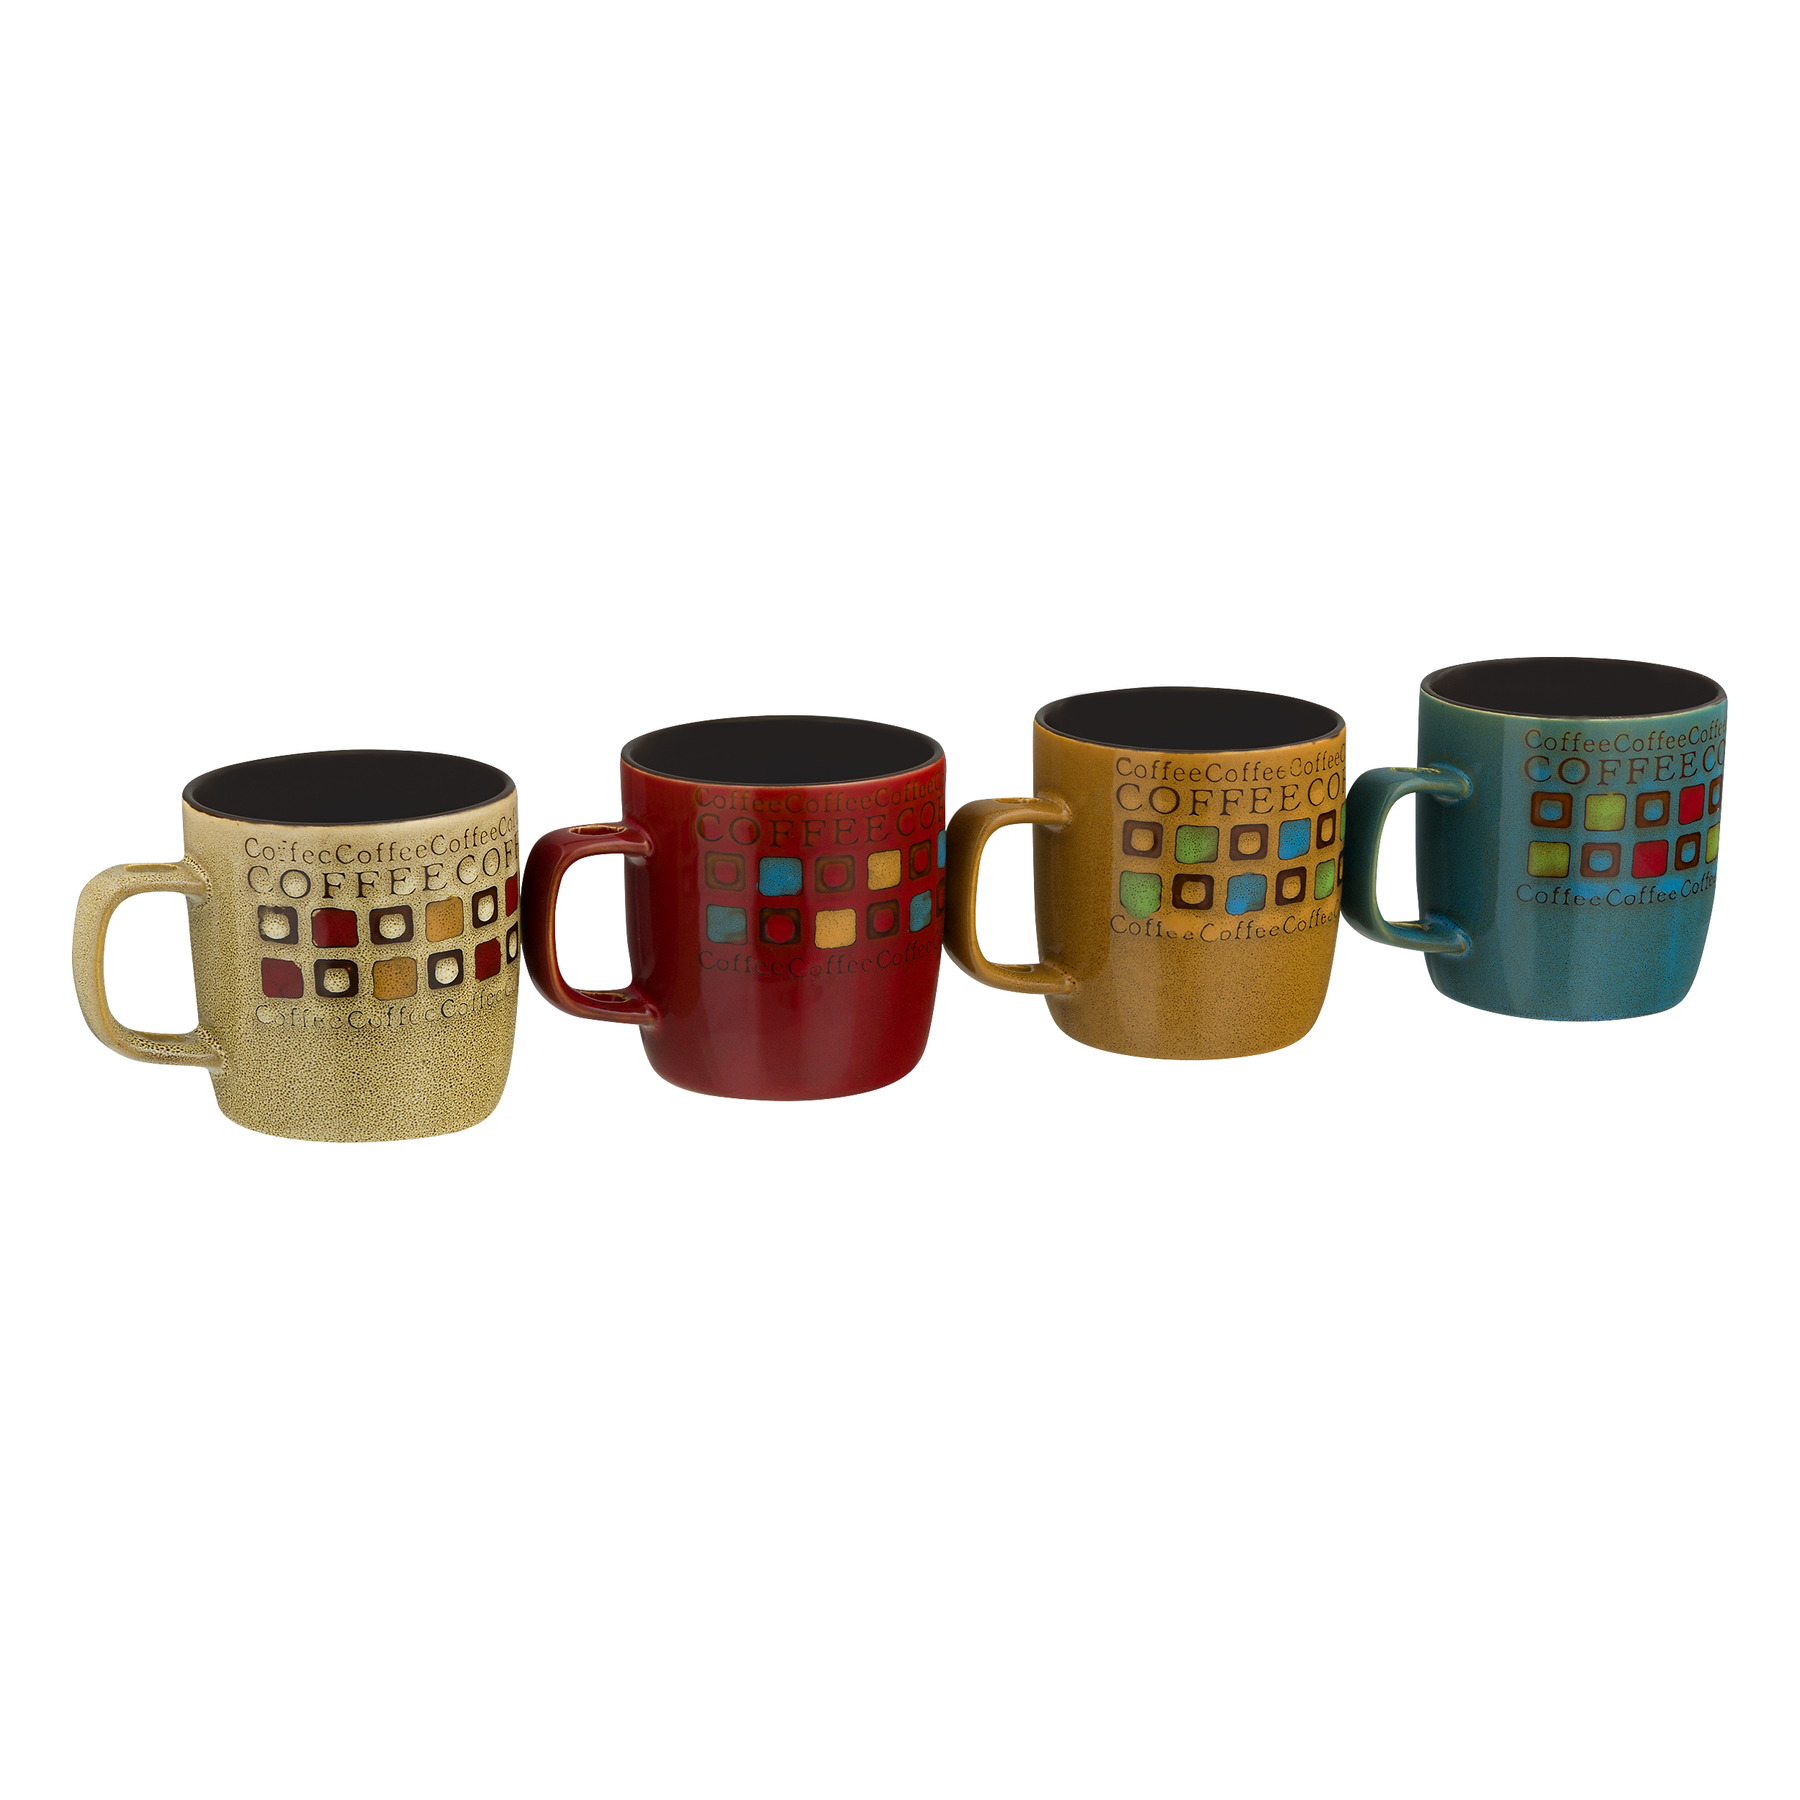 Mr. Coffee Cafe Americano Mugs With Spoons - 8 PC, 8.0 PIECE(S) - image 2 of 5